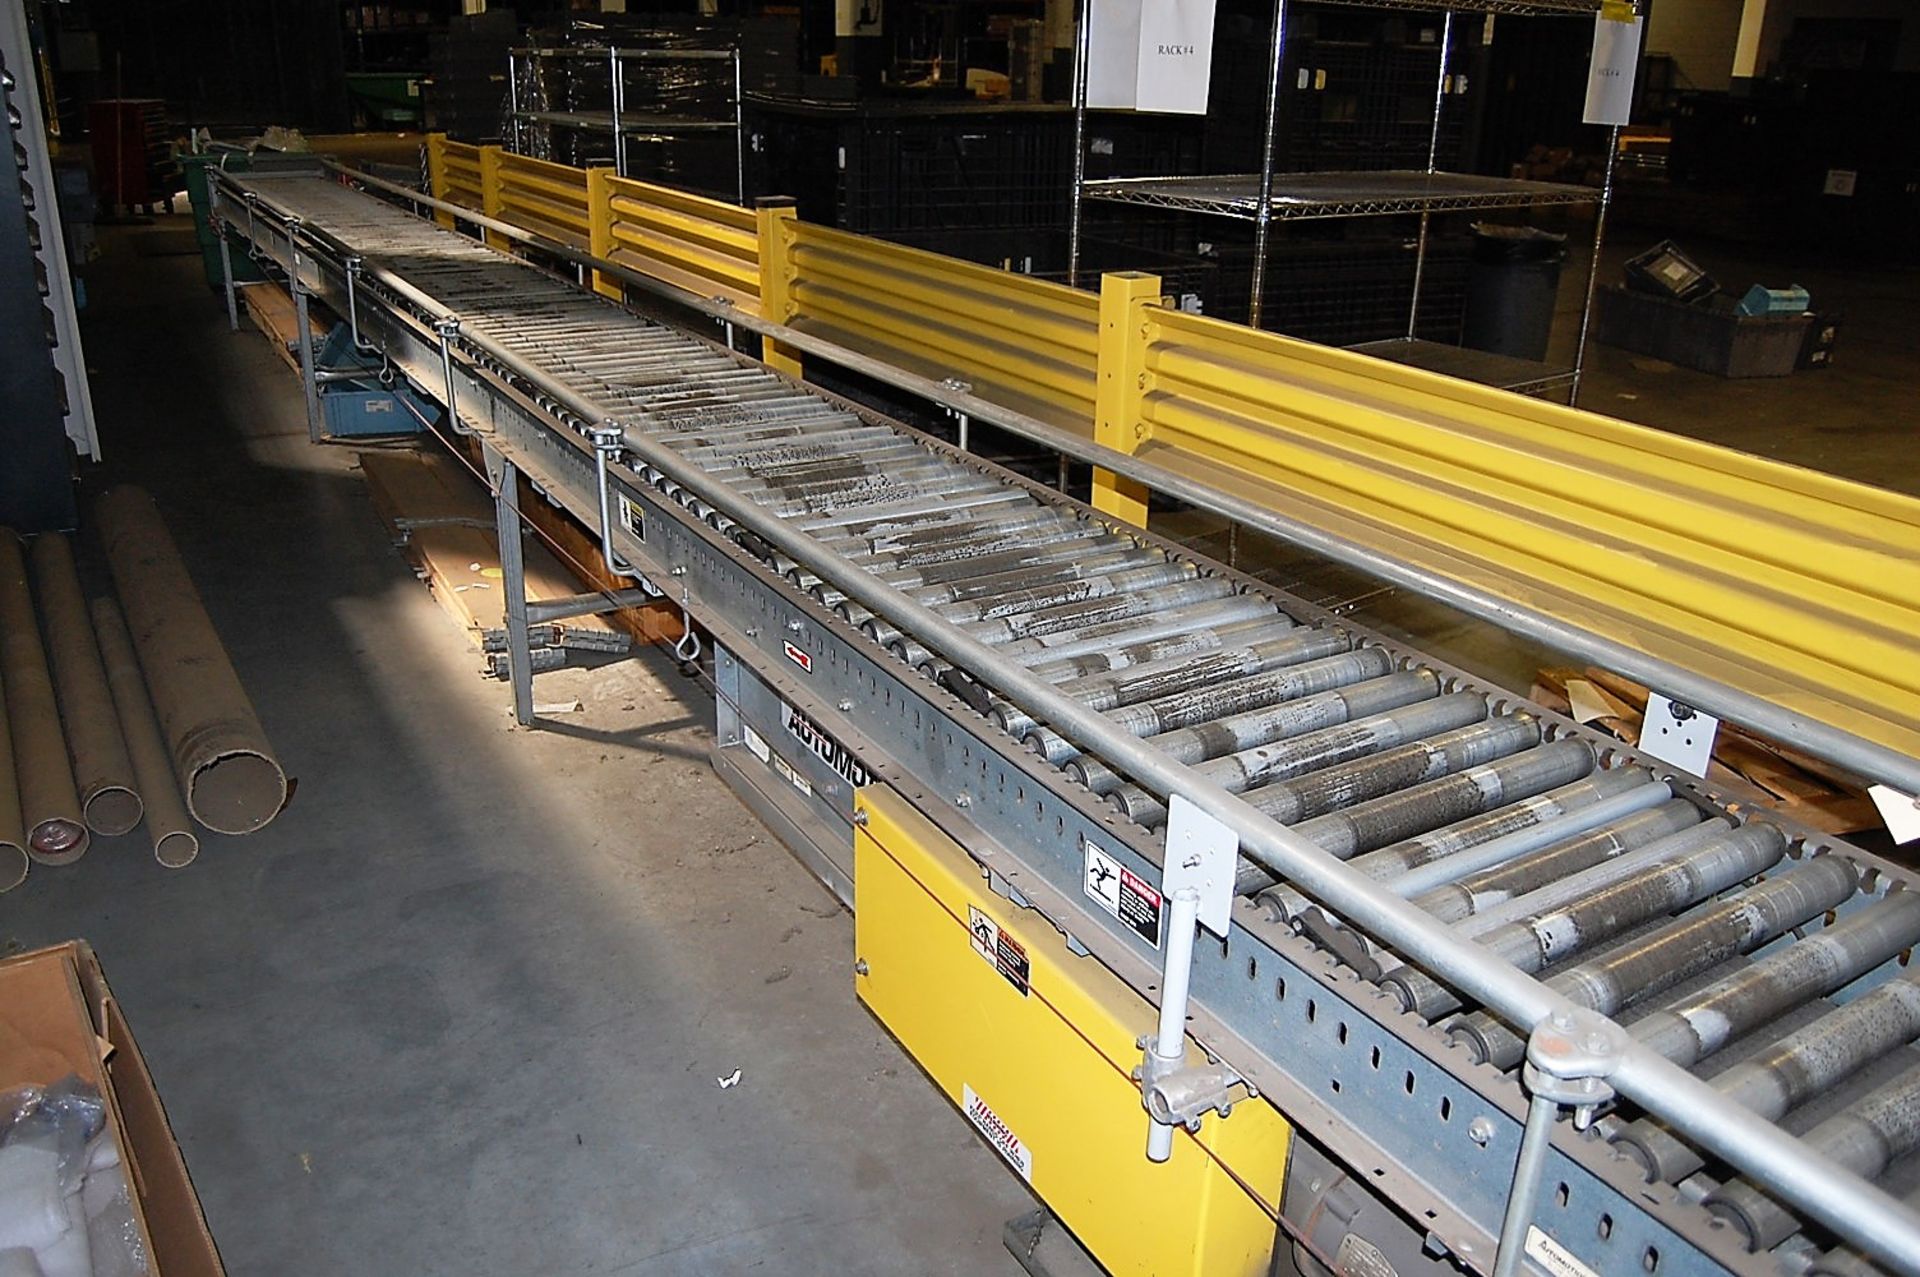 White Conveyors Model Remstar Series 2400 Vertical Carousel Storage/Inventory System - Image 25 of 49